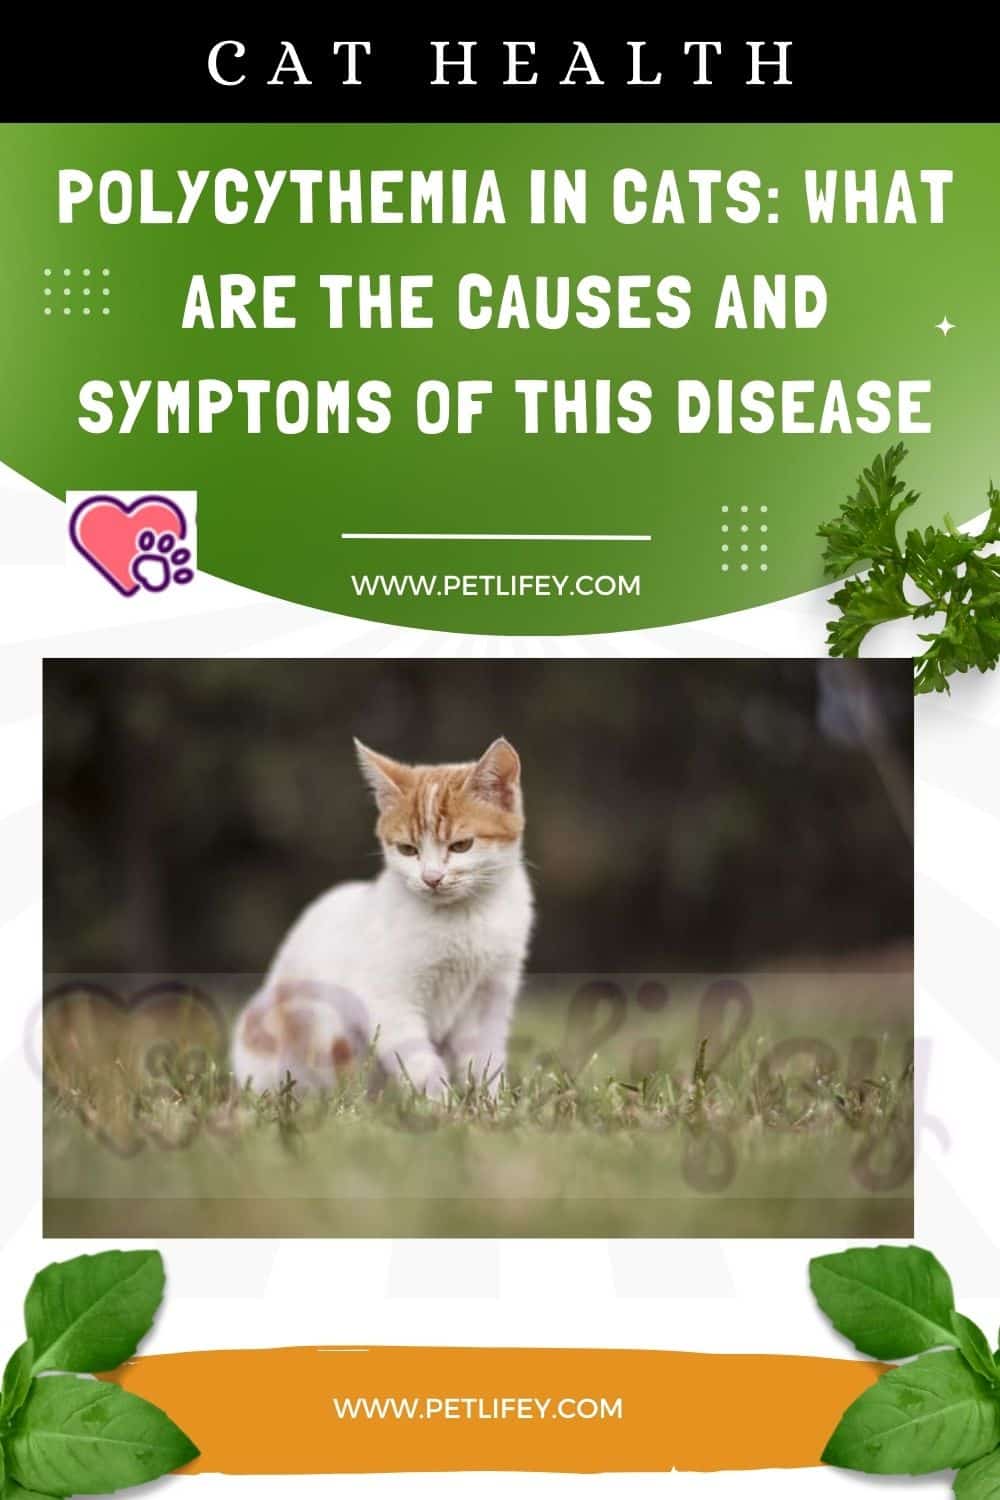 Polycythemia in Cats